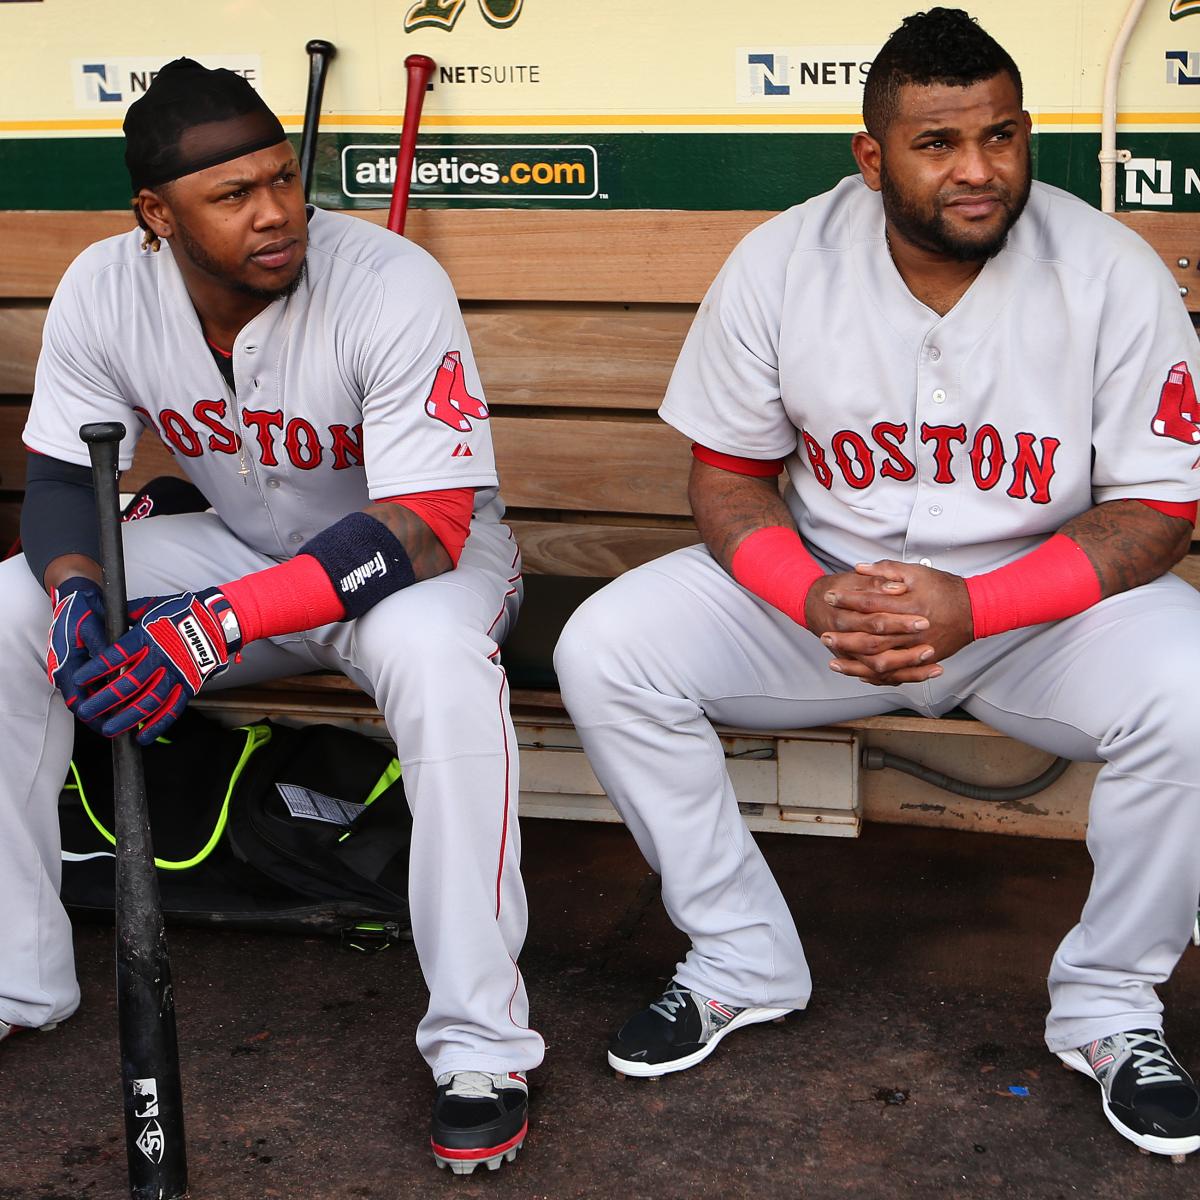 Red Sox signings of Hanley Ramirez, Pablo Sandoval turned out as